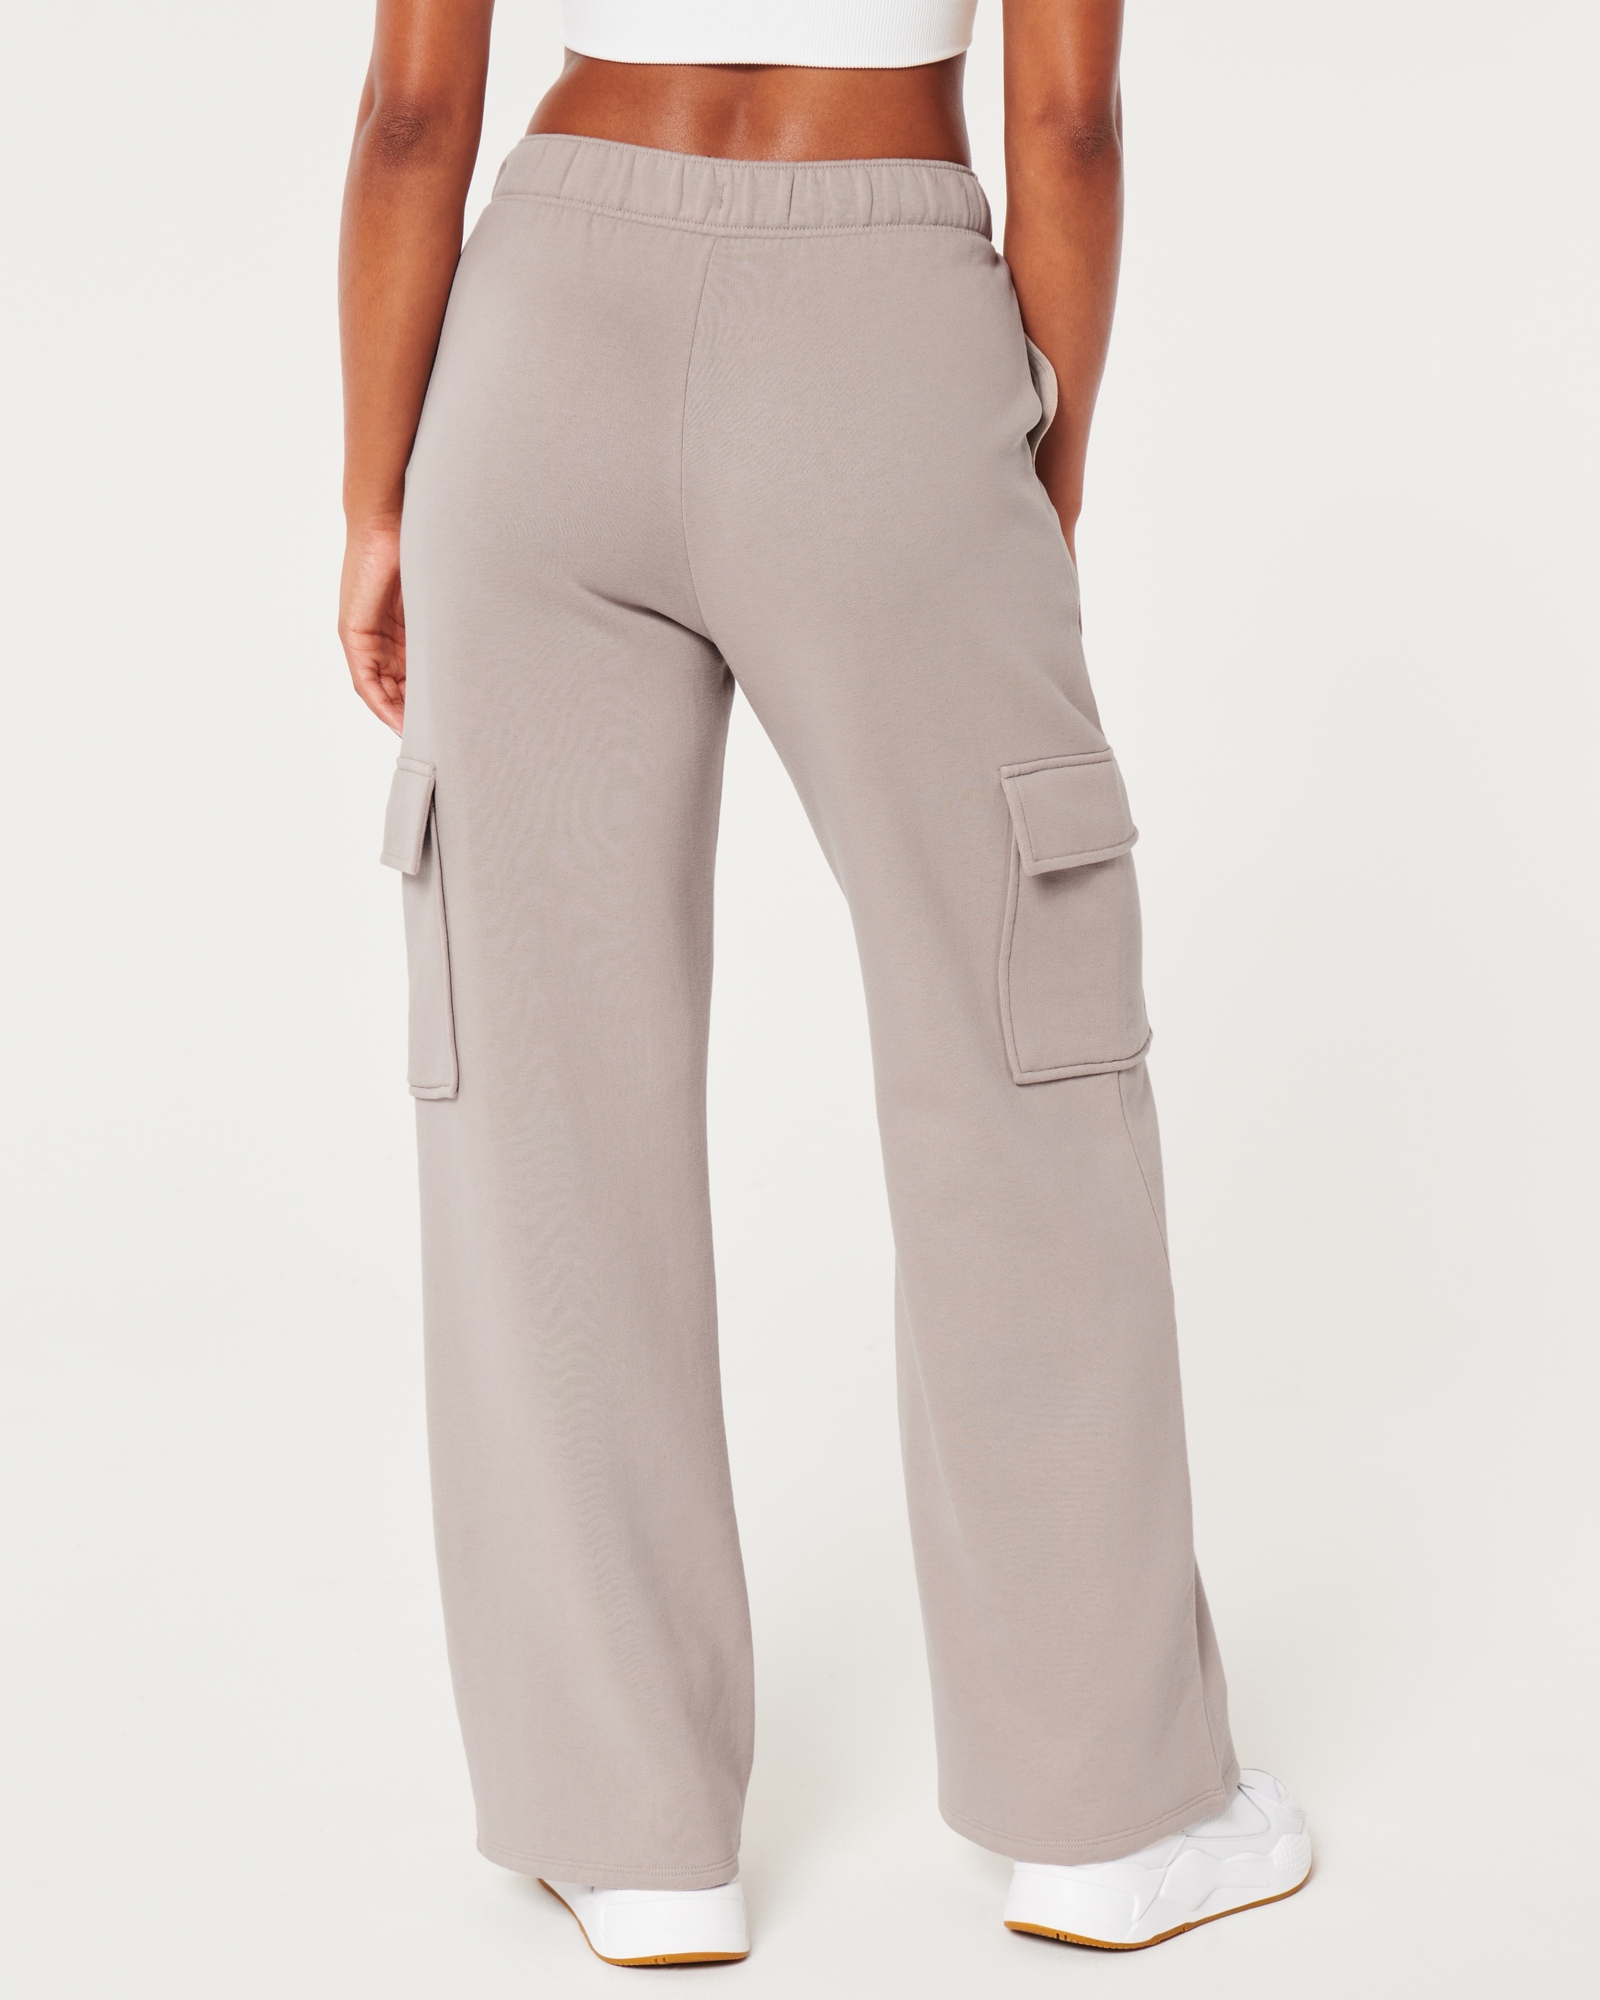 Women's Gilly Hicks Active Wide-Leg Cargo Sweatpants, Women's Clearance